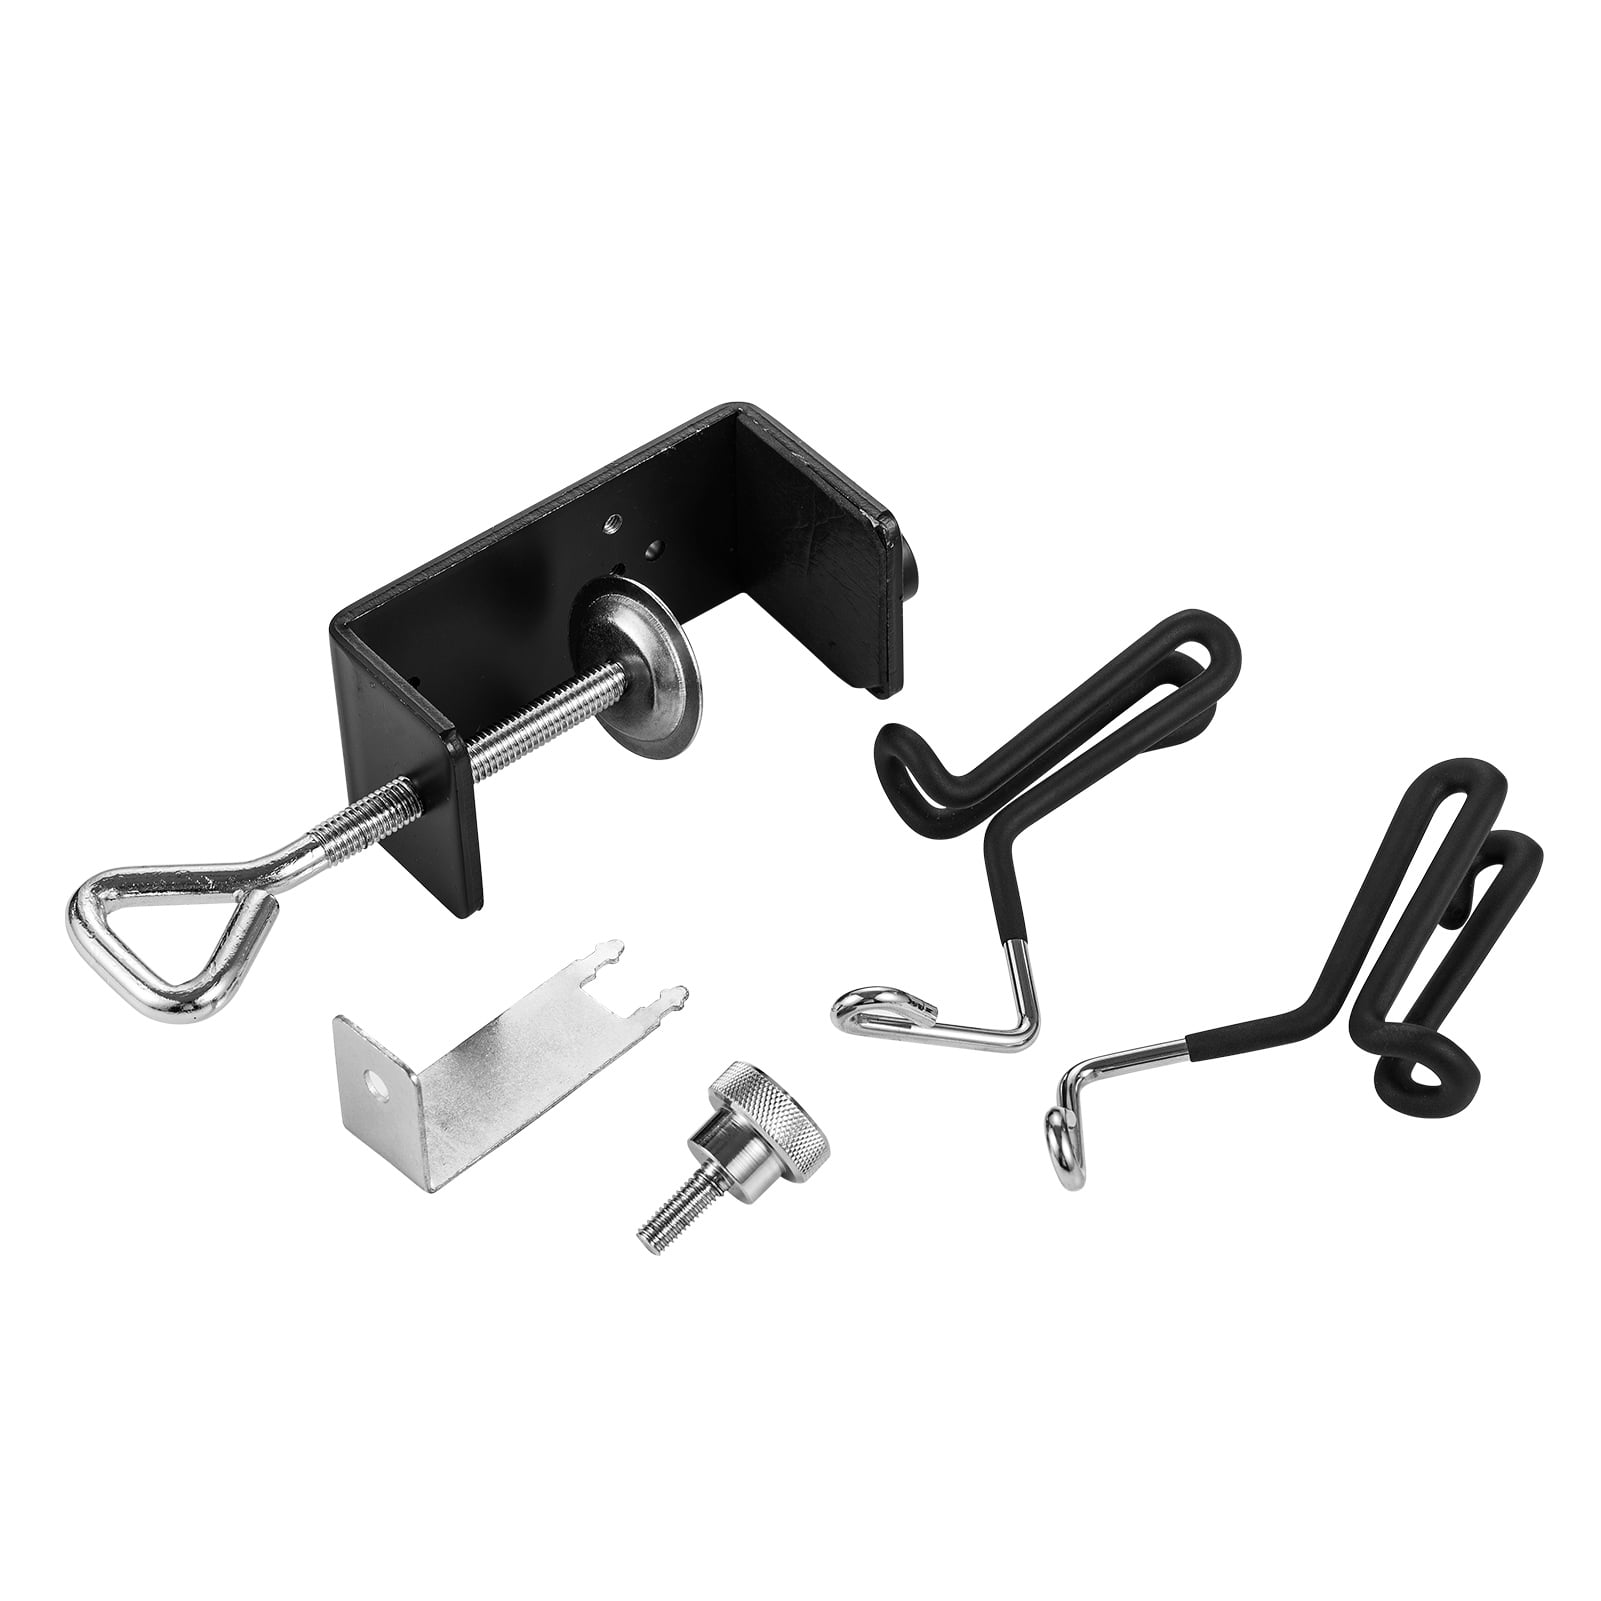 6 Stand Clamp-on Airbrush Holder 360° Rotate Airbrush Stand Table-mount  Airbrushes Holder Station Paint Holder - AliExpress